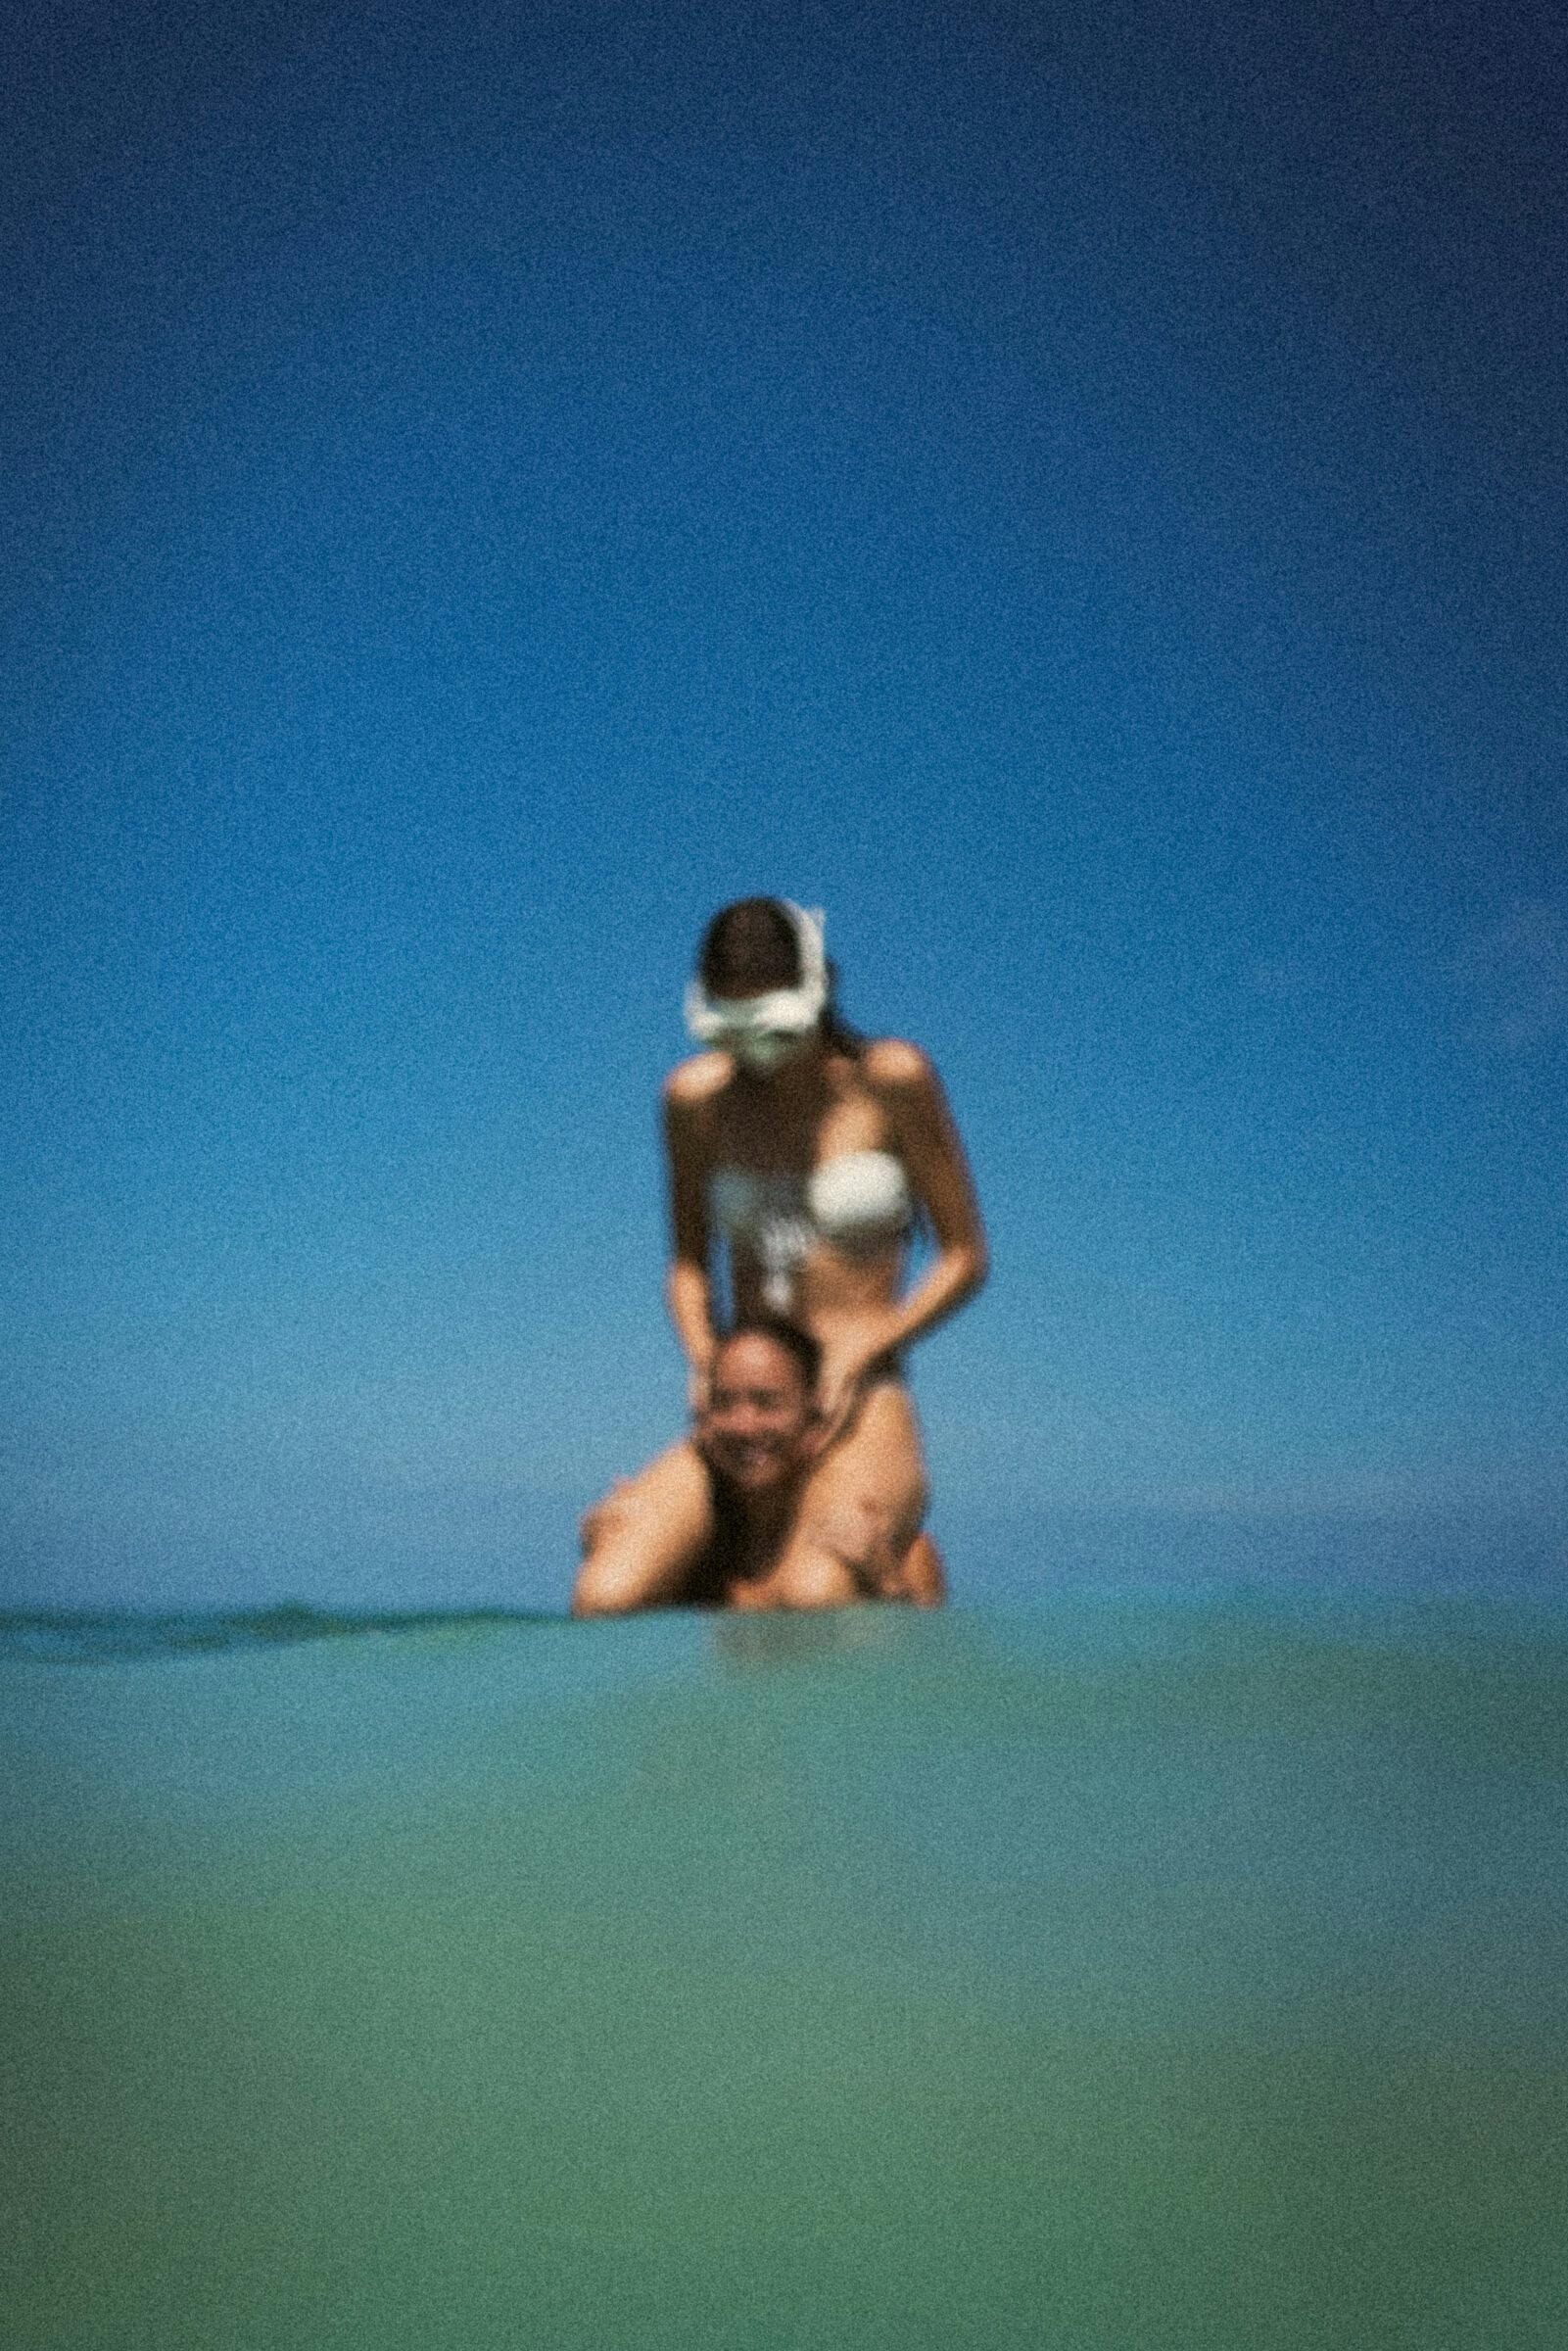 person carrying a person on shoulders in the water